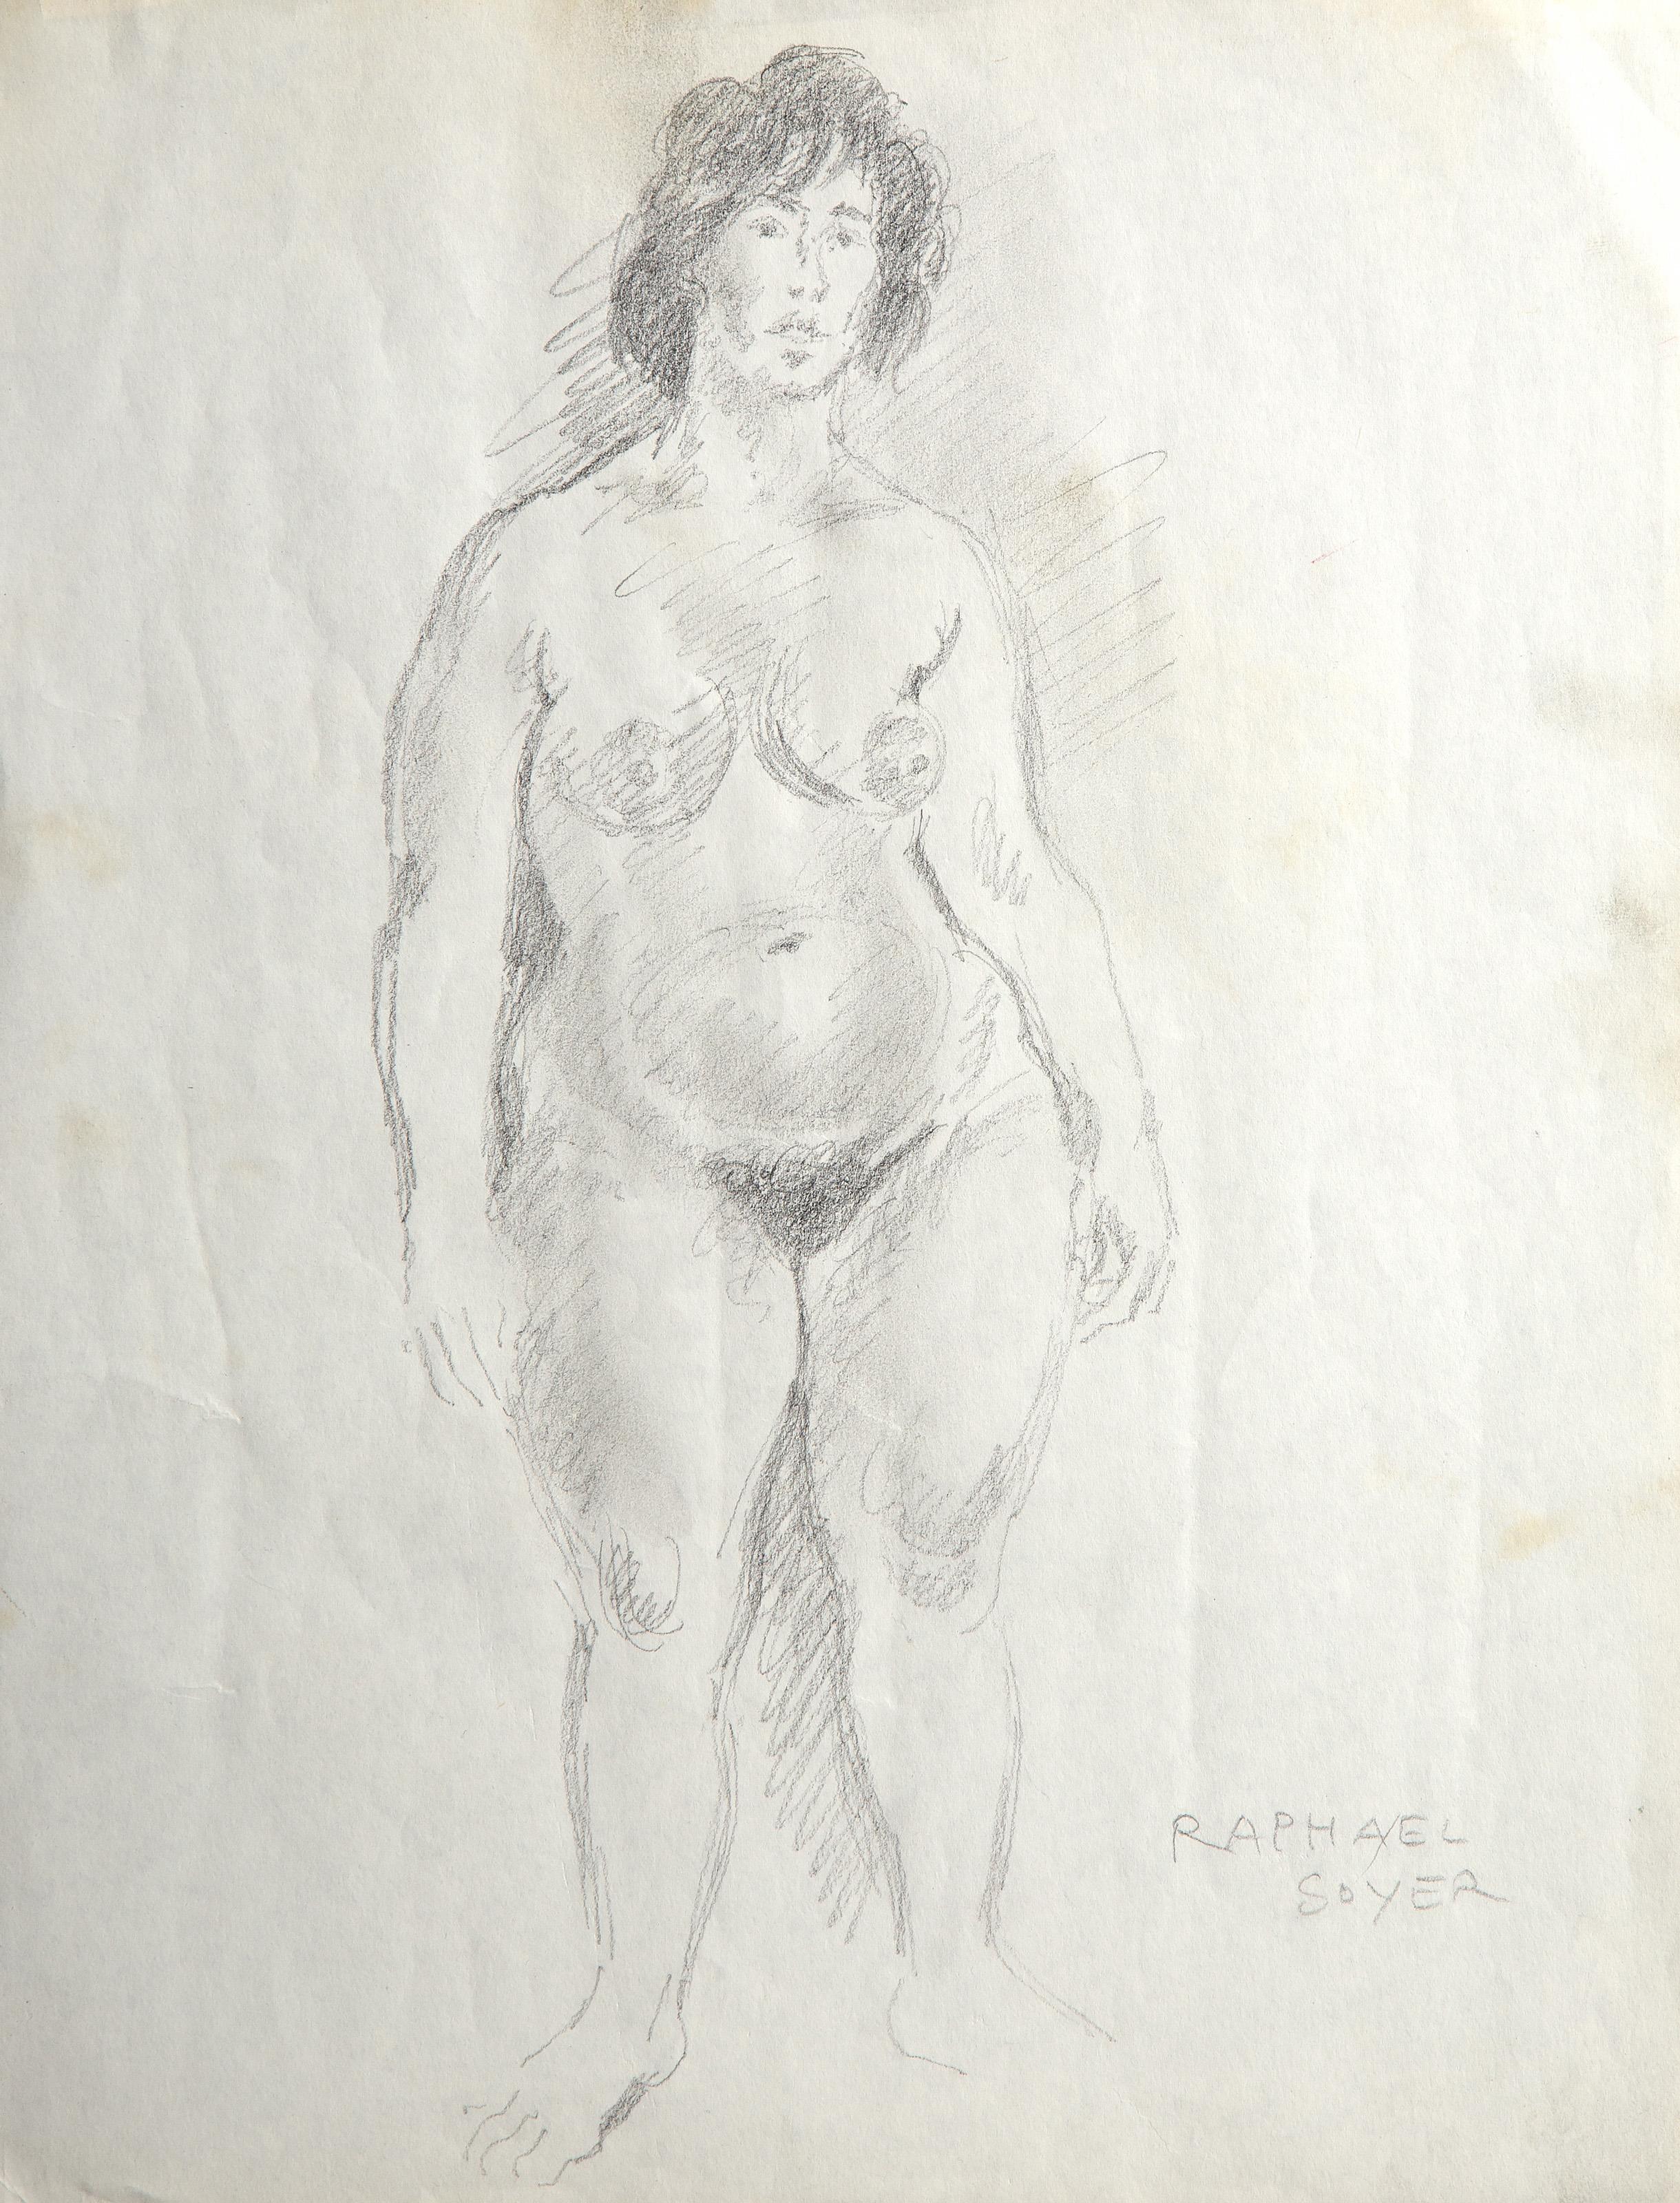 Raphael Soyer, Russian/American (1899 - 1987) -  Nude Study II. Medium: Graphite on Paper, signed in pencil, Size: 13.5 x 10.5 in. (34.29 x 26.67 cm) 